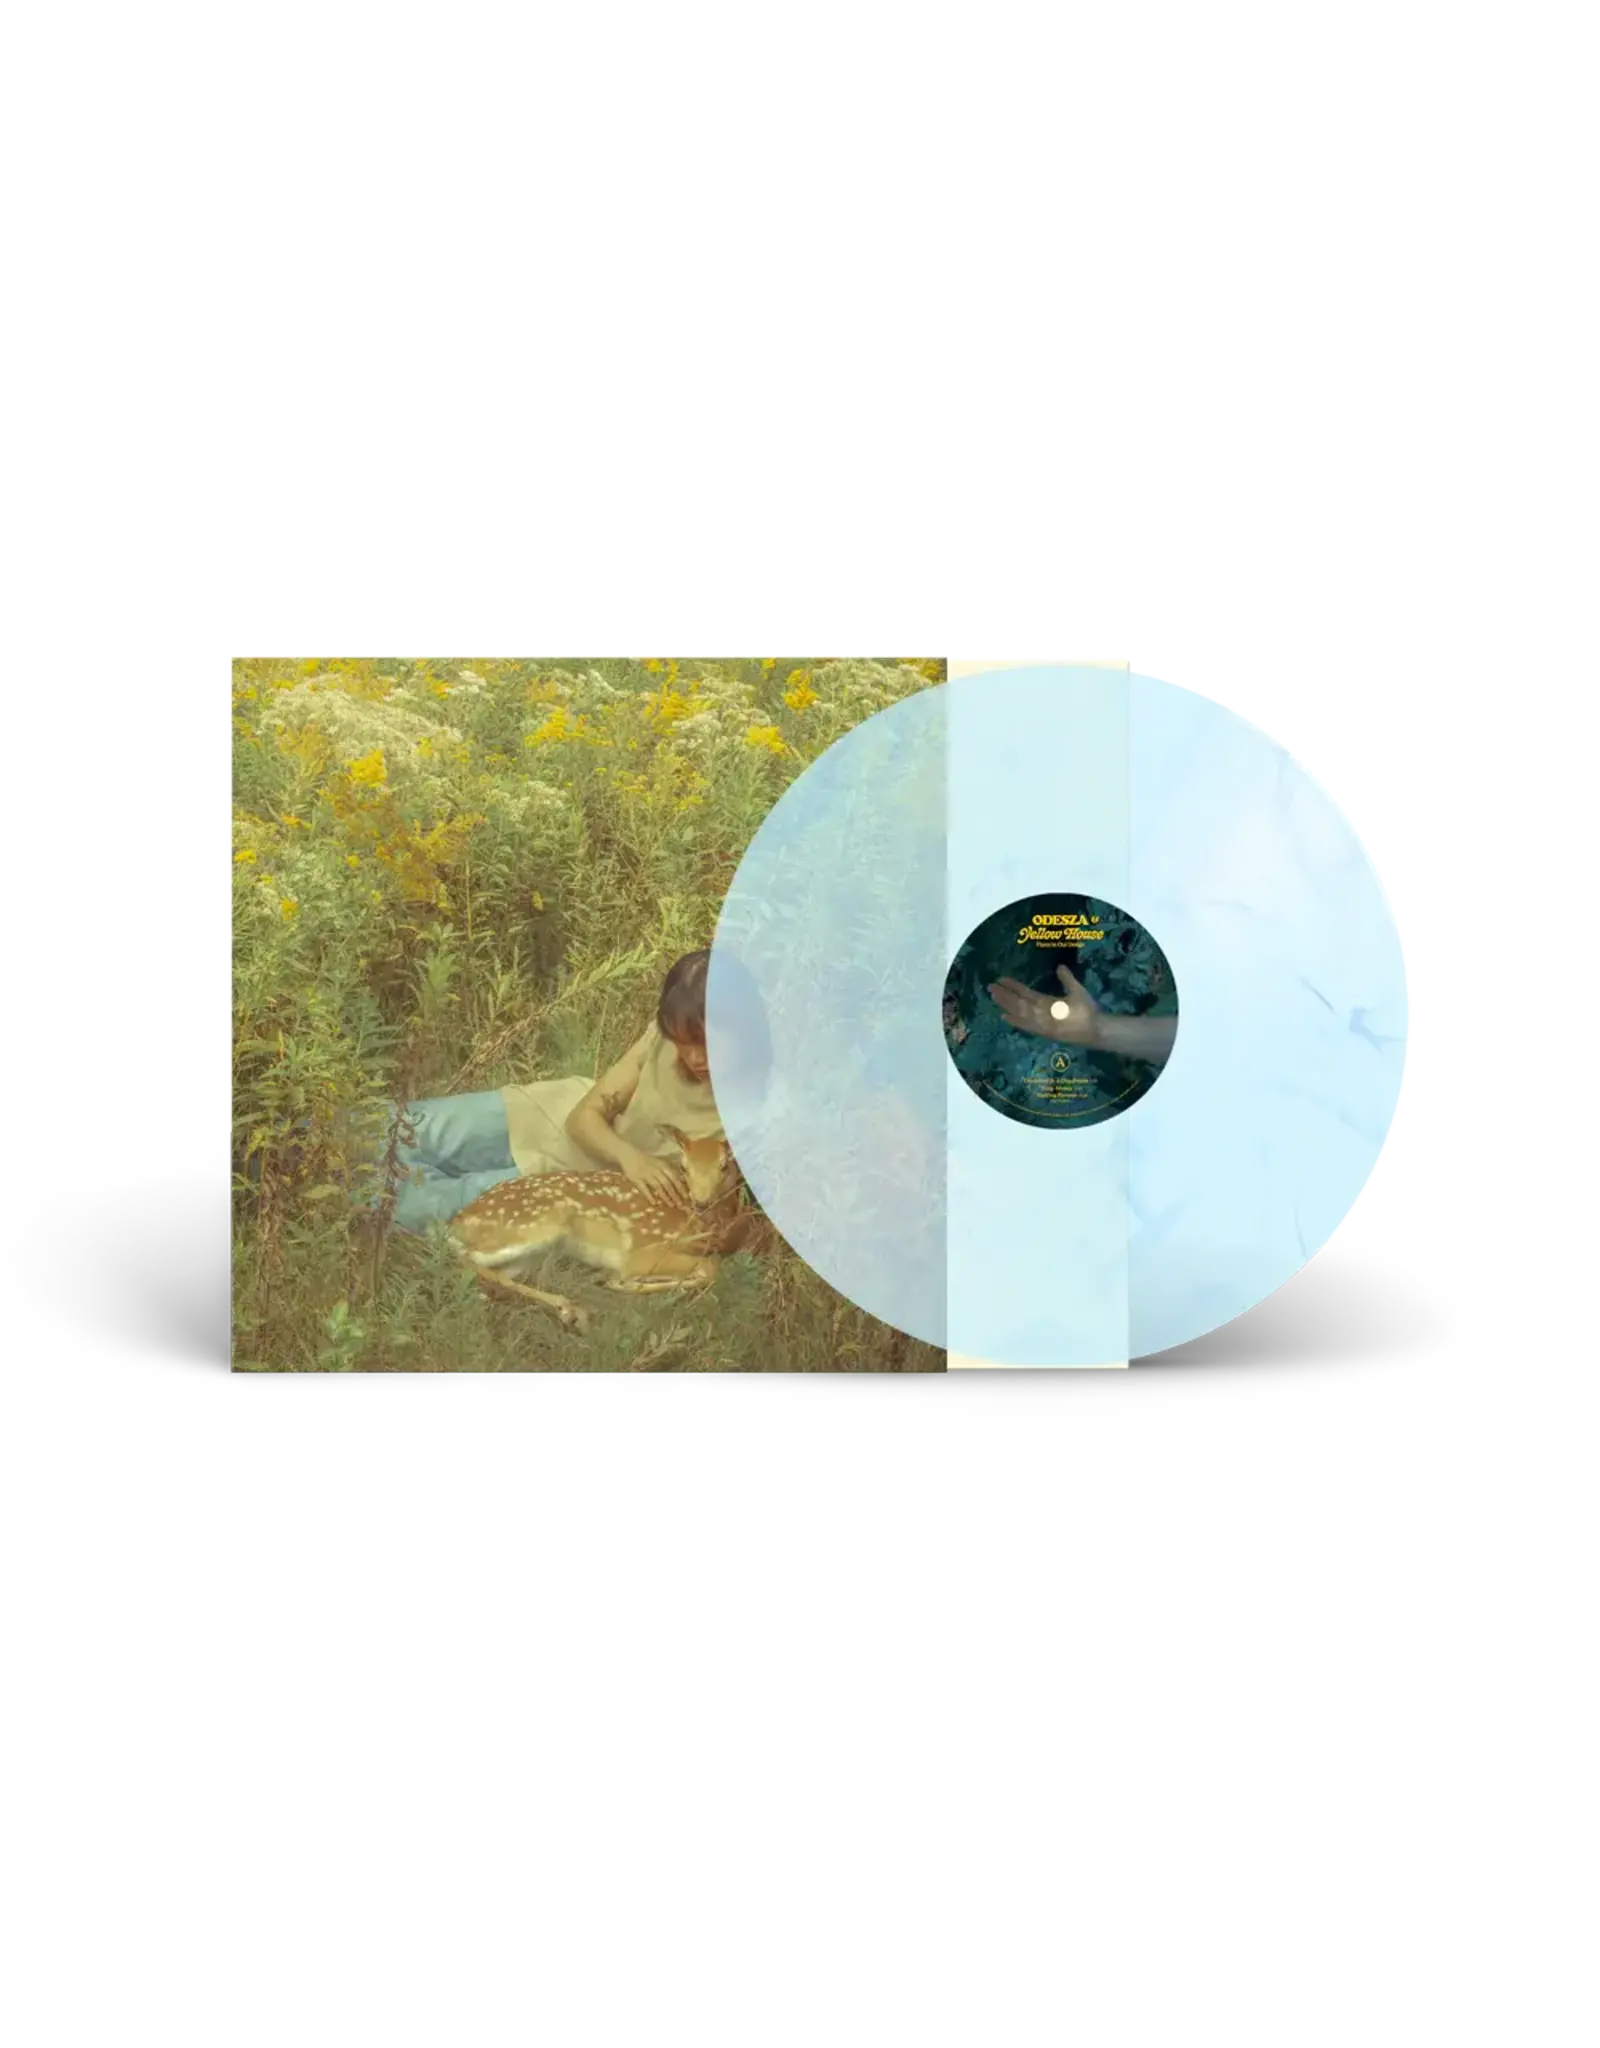 ODESZA - Flaws in Our Design (Clear Blue Vinyl)